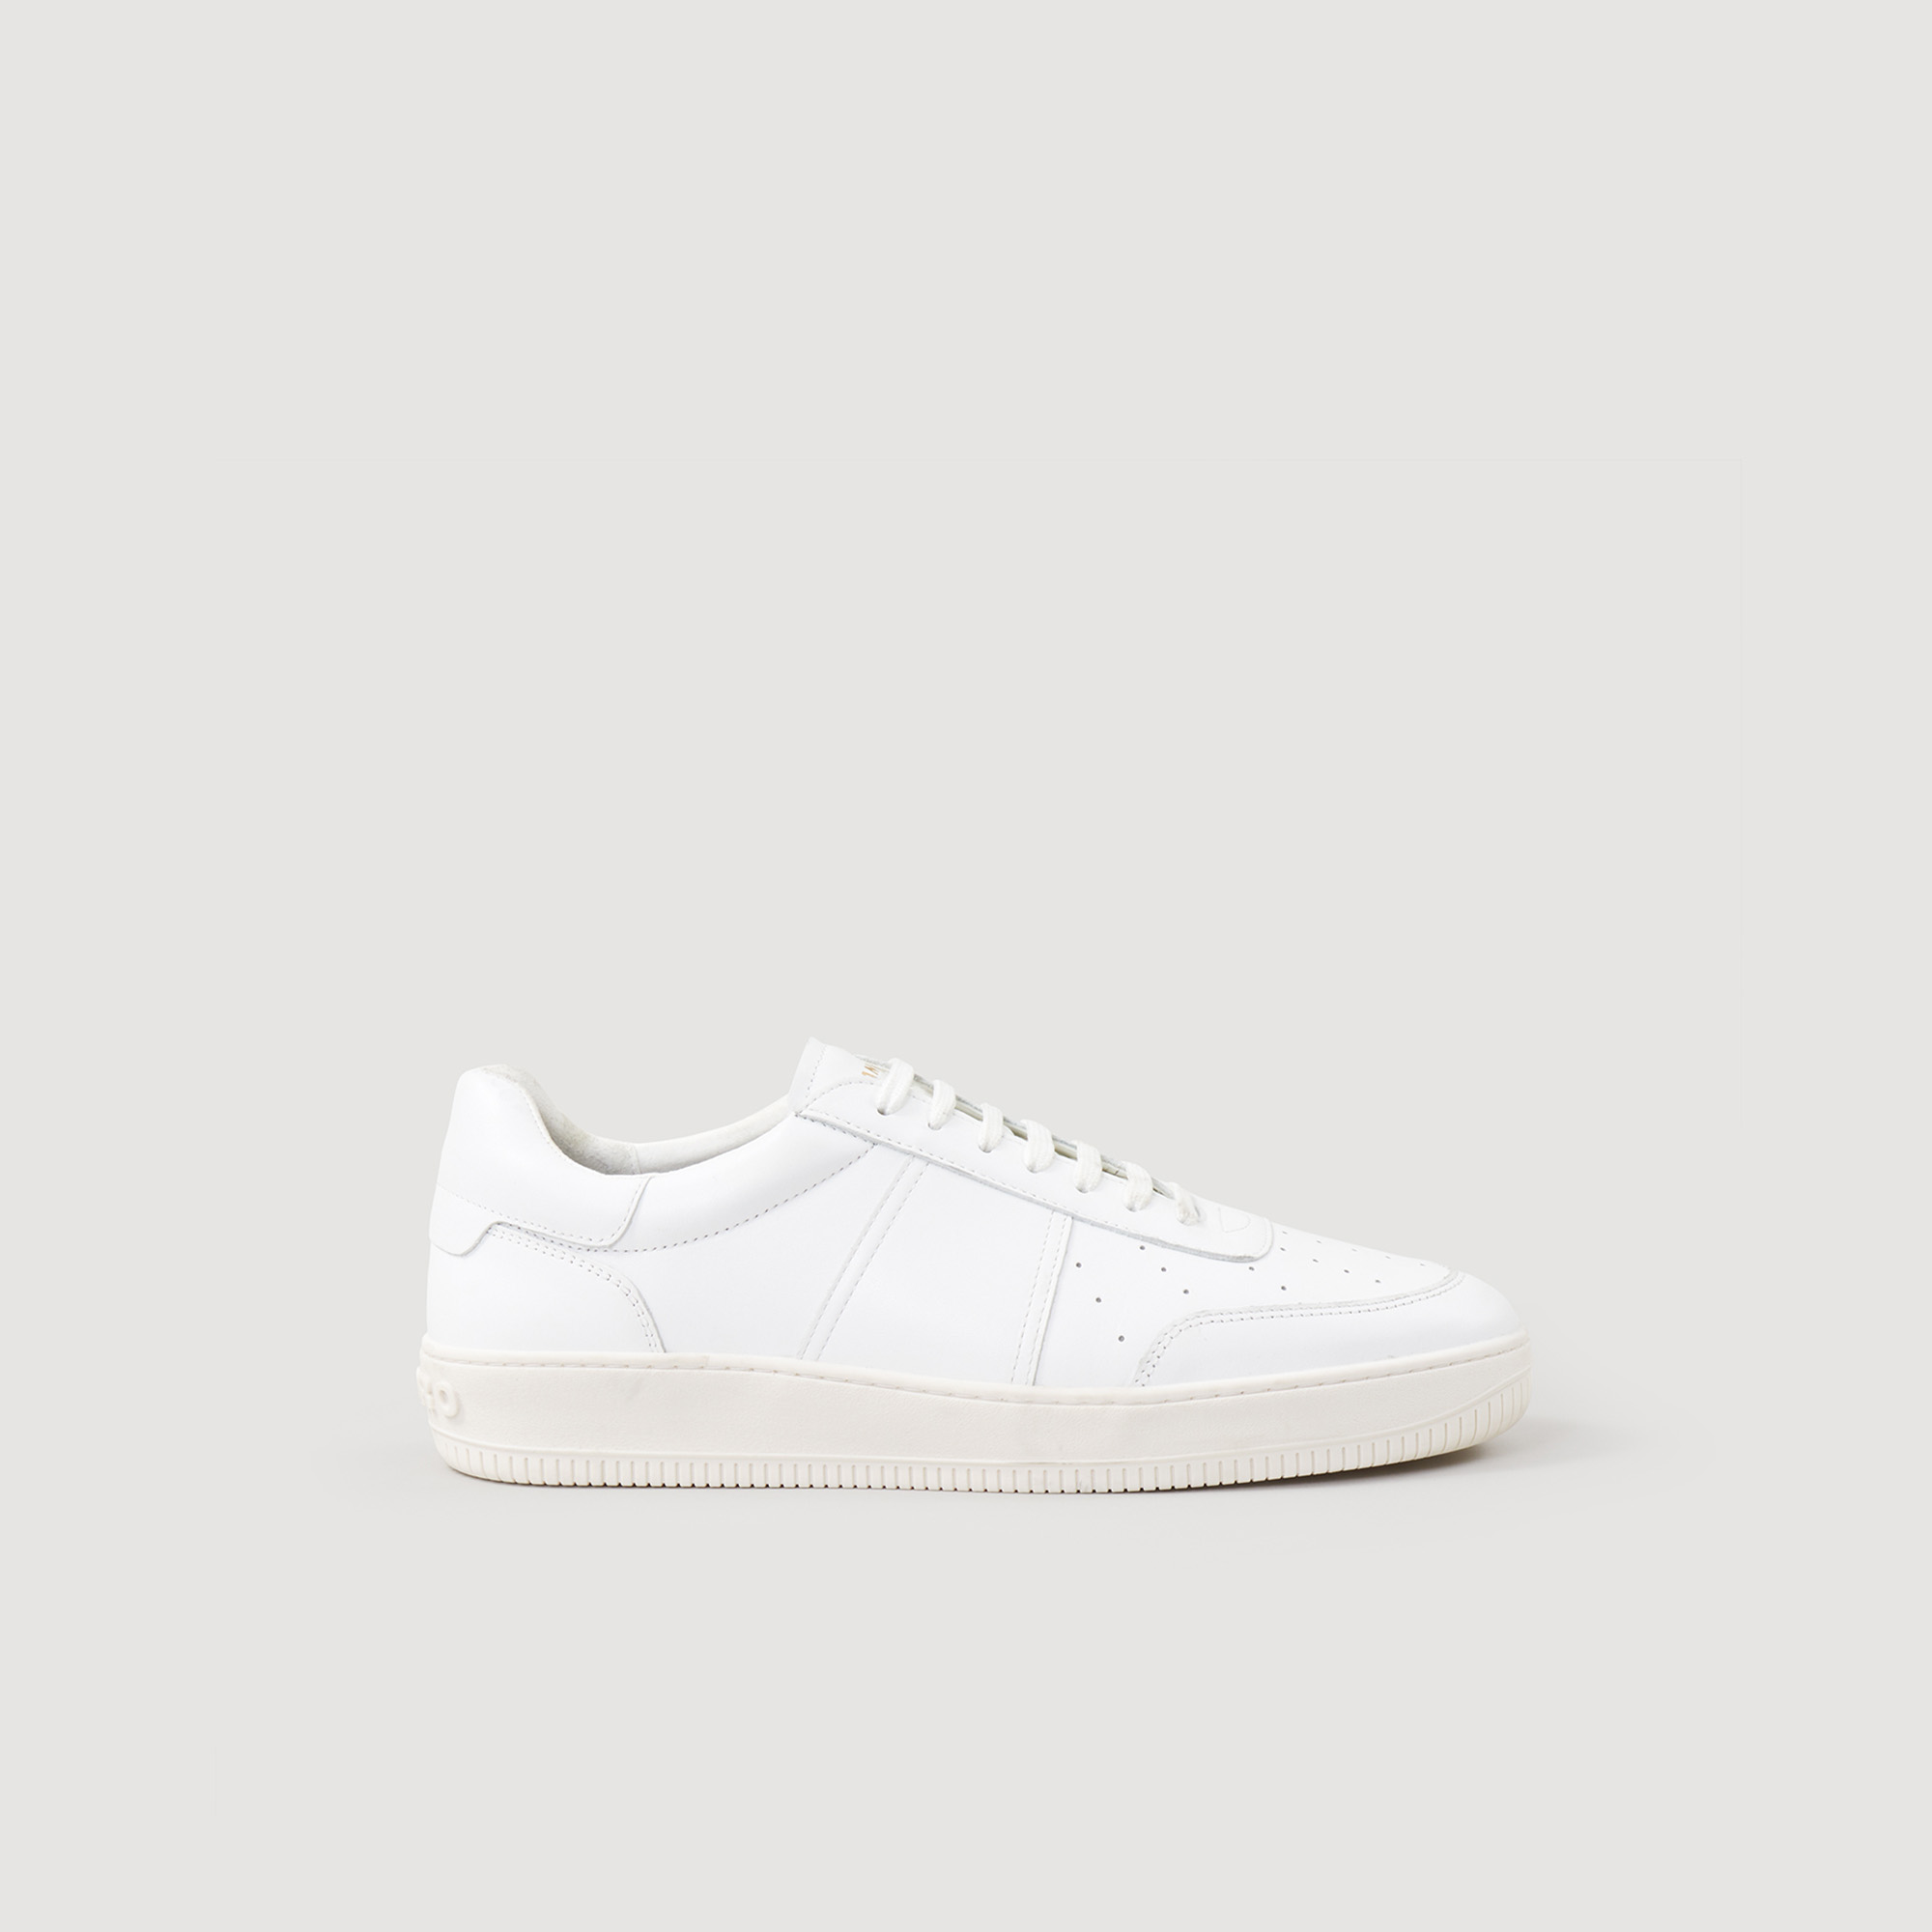 Sandro polyamide Low-top leather and split leather sneakers with lace fastening, Sandro signature on the tongue, and logo on the sole